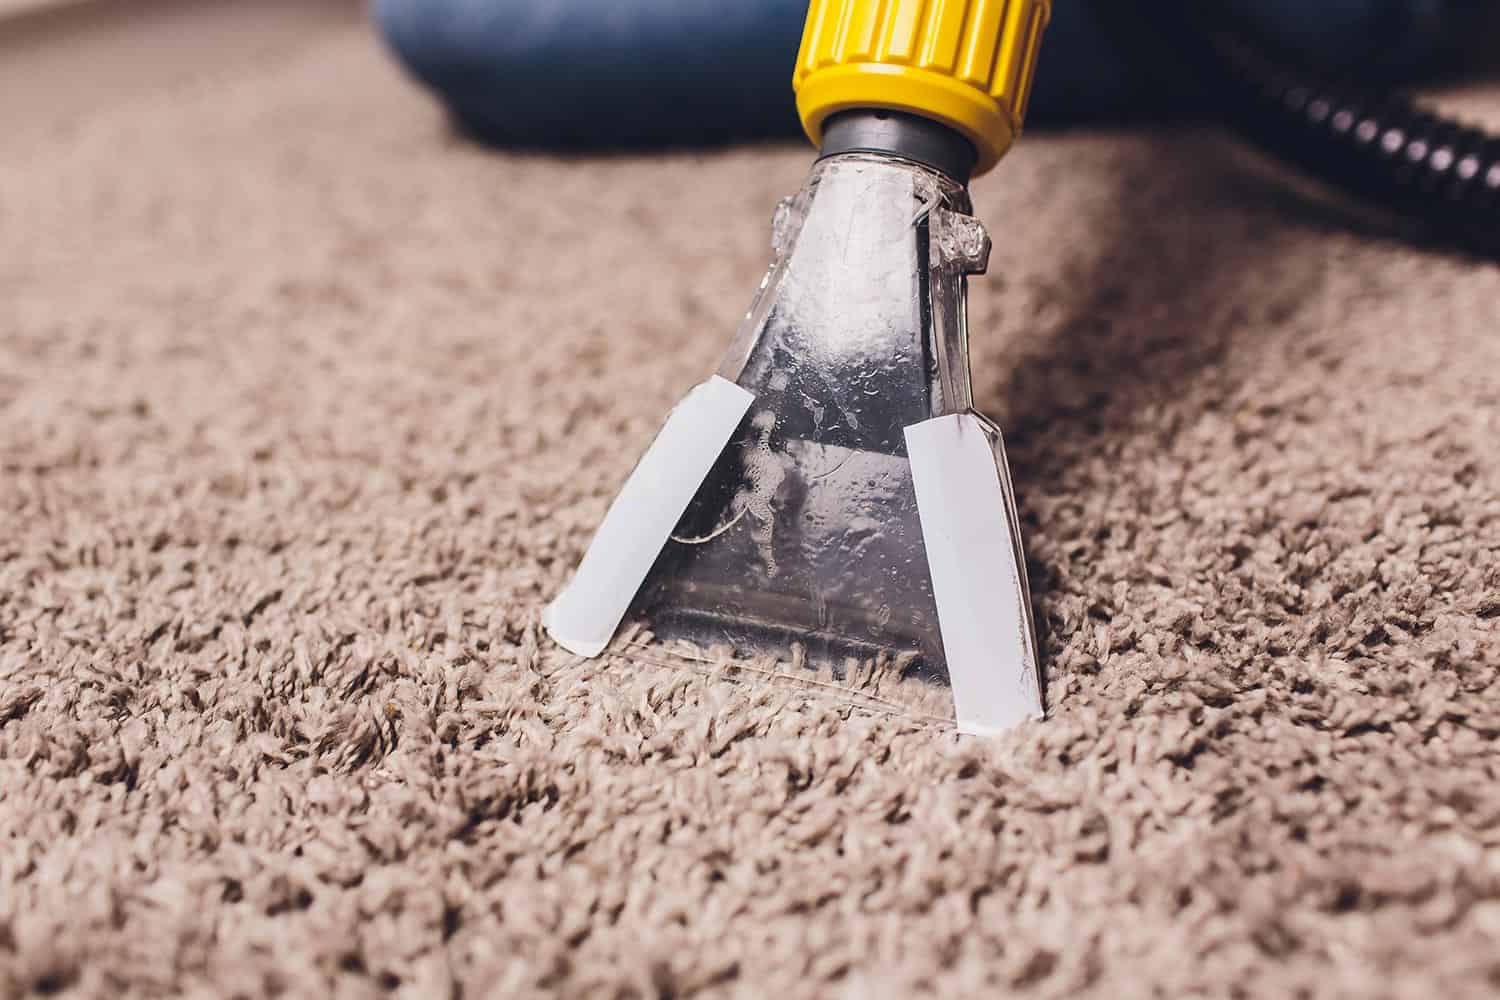 Woman removing dirt from carpet with vacuum cleaner in room